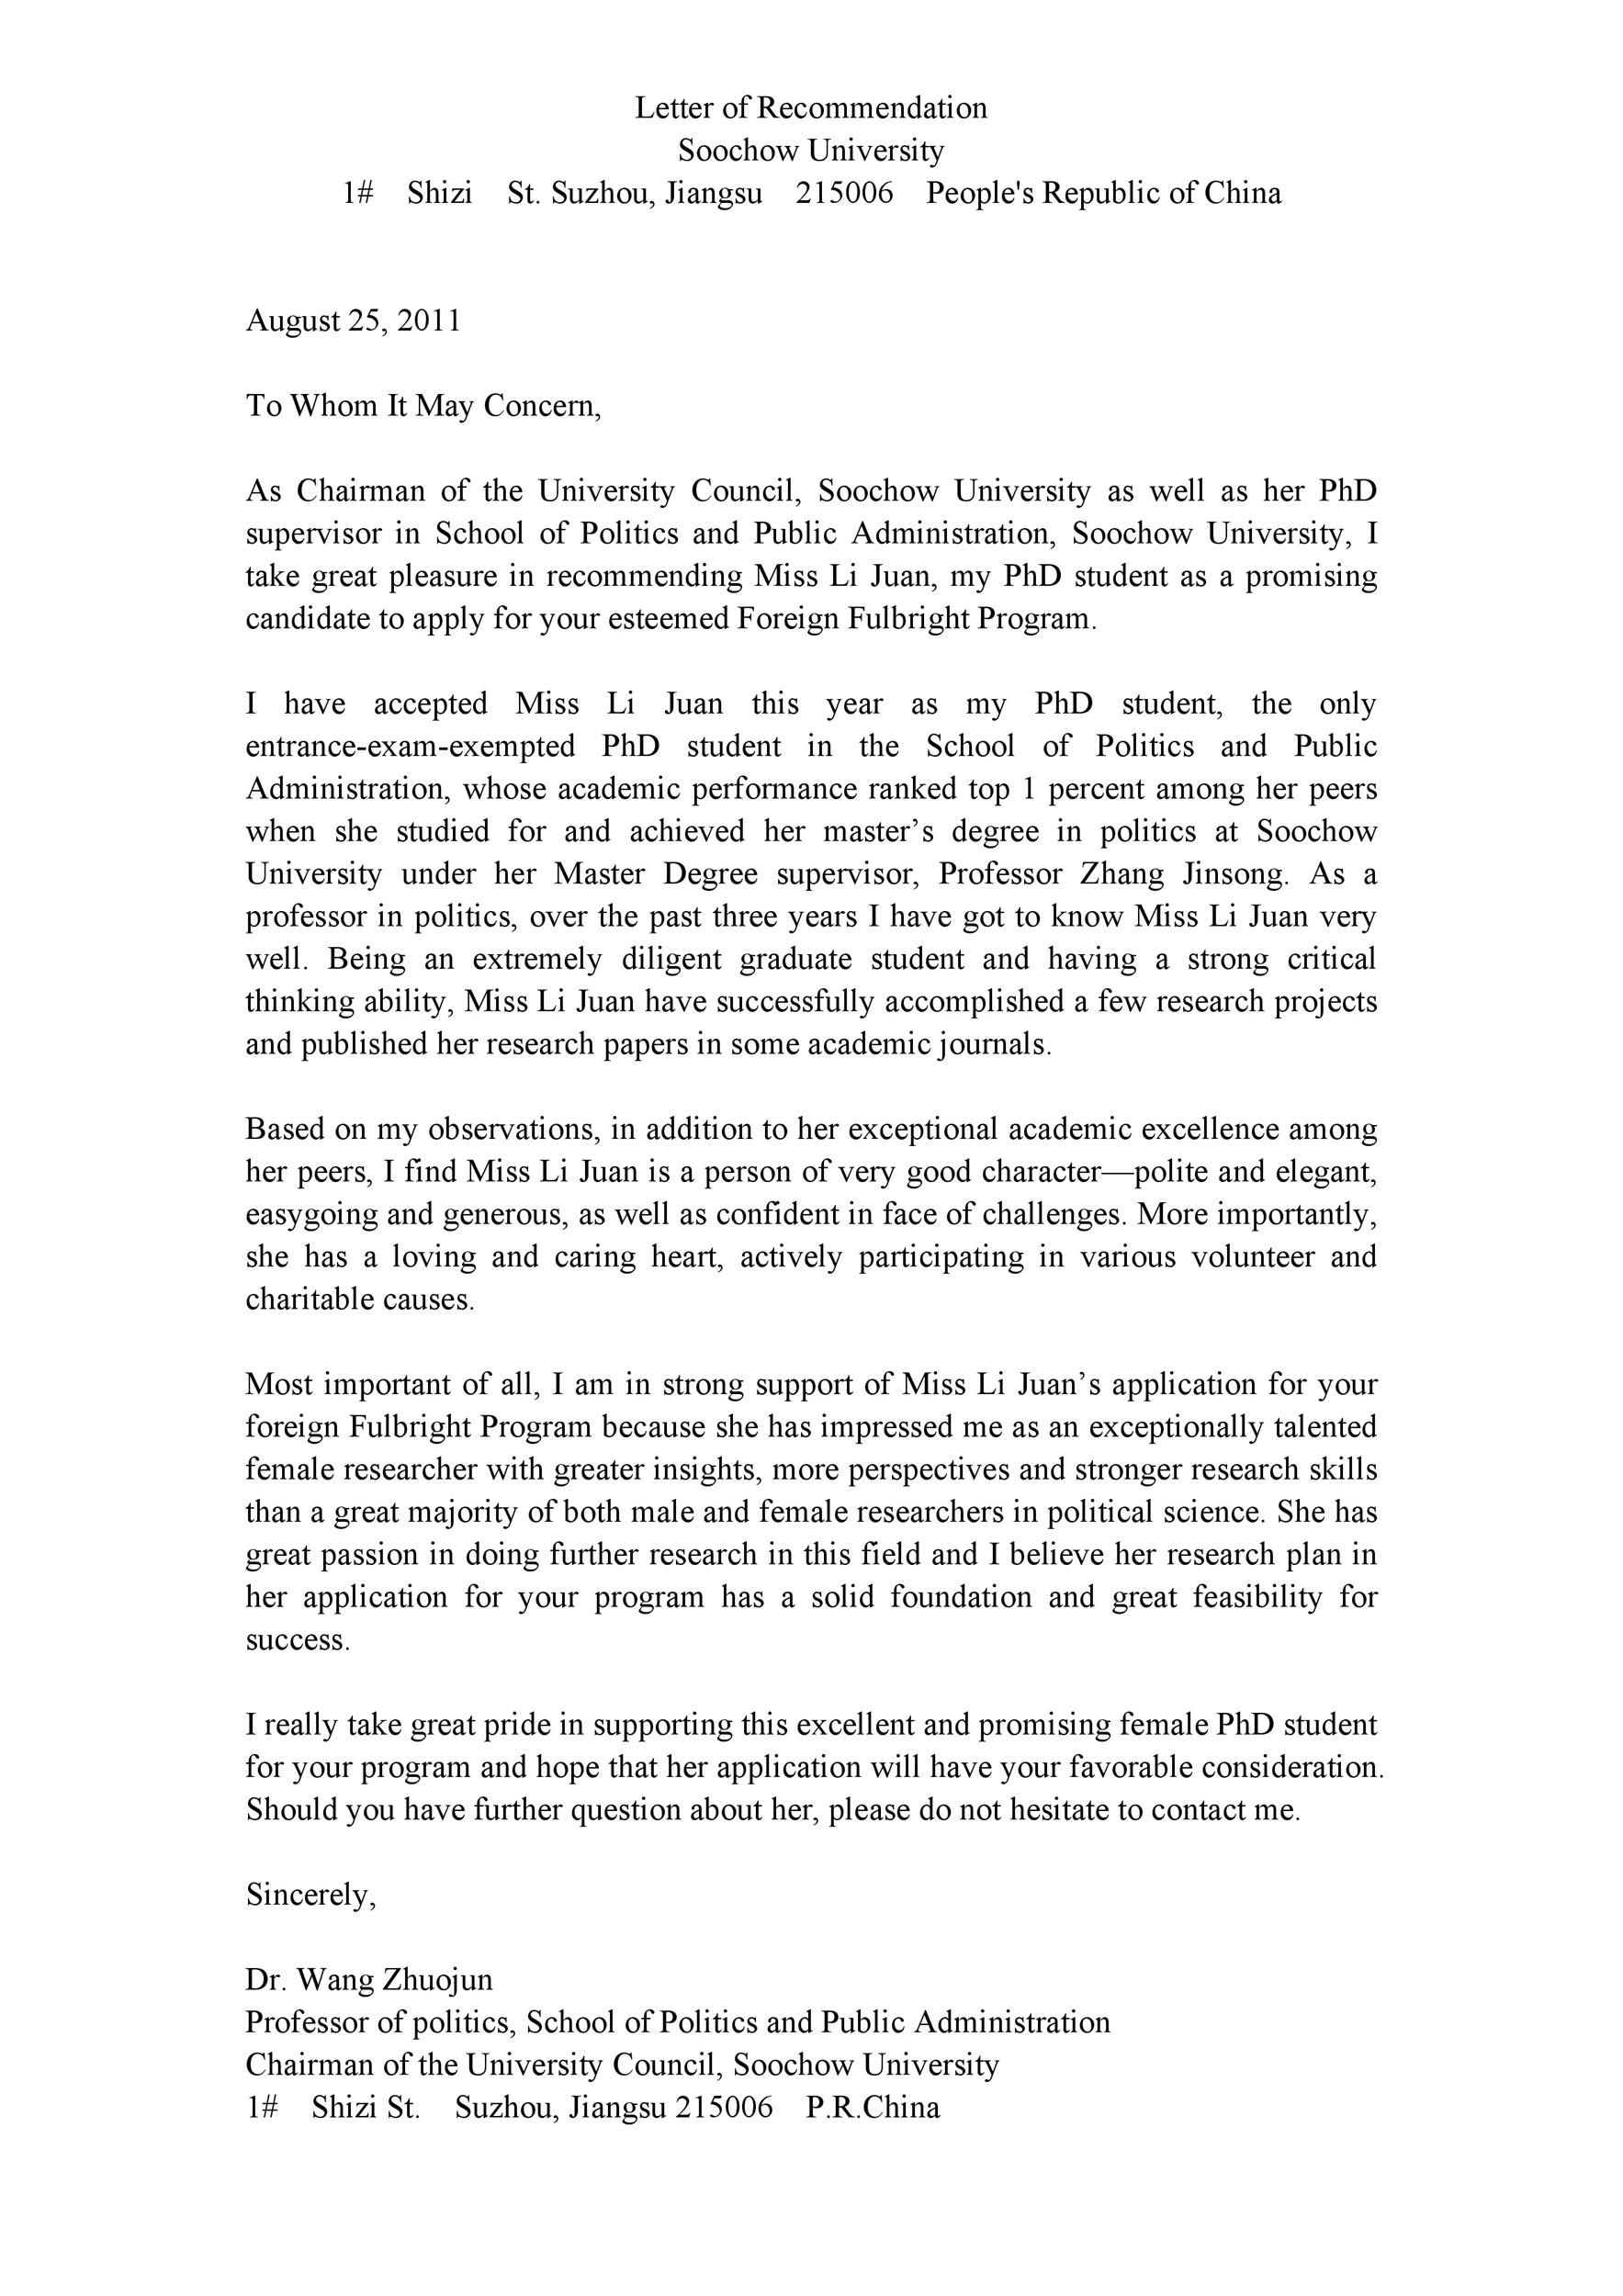 Sample Letter Of Recommendation For Masters Program from templatelab.com